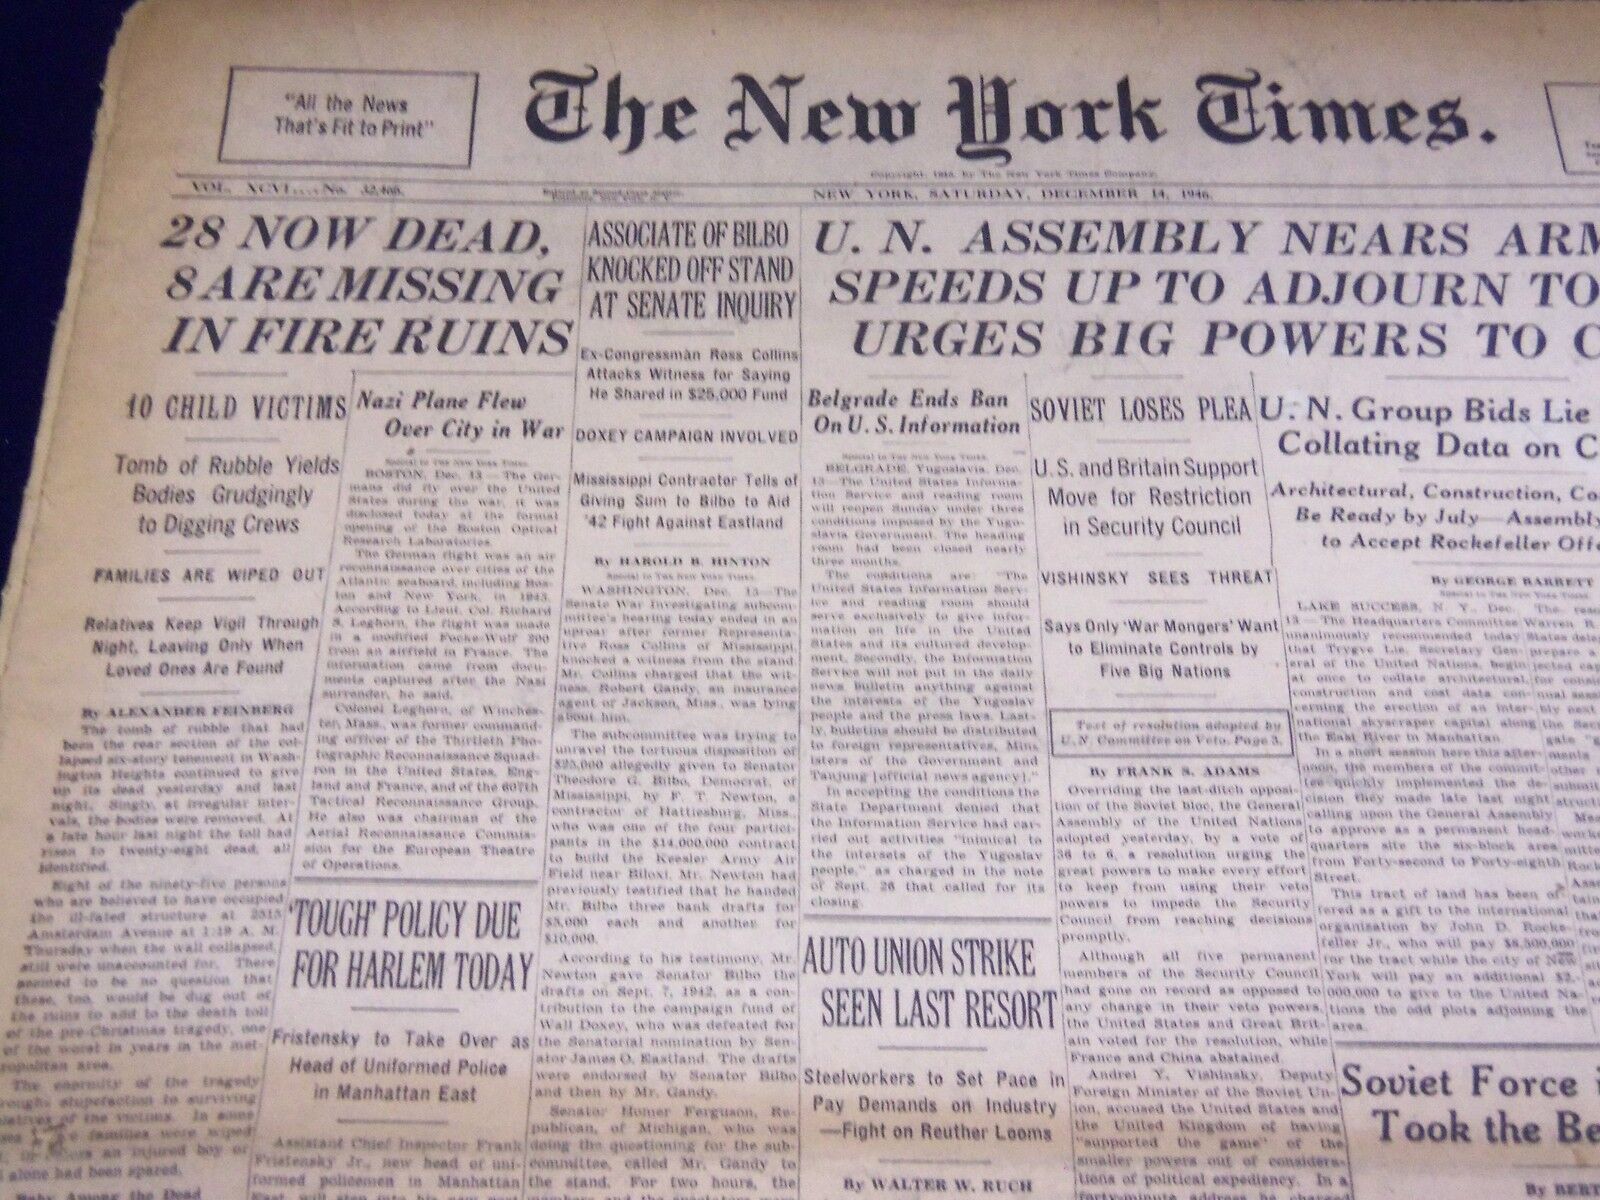 1946 DEC 14 NEW YORK TIMES - 28 NOW DEAD IN FIRE RUINS - NT 2348